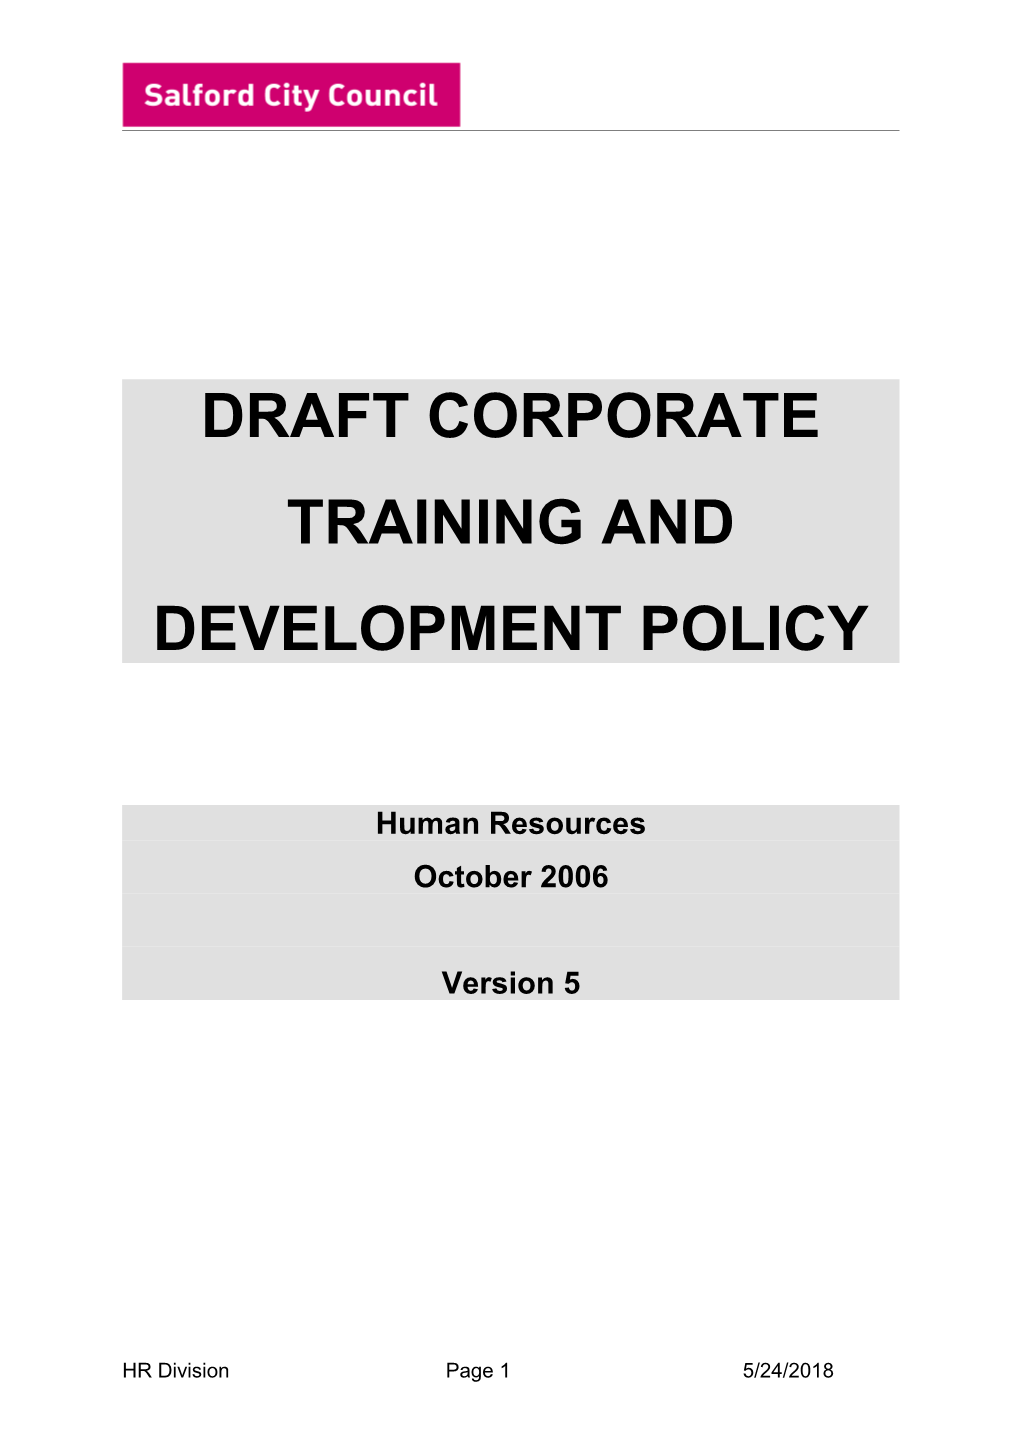 Draft Corporate Training and Development Policy